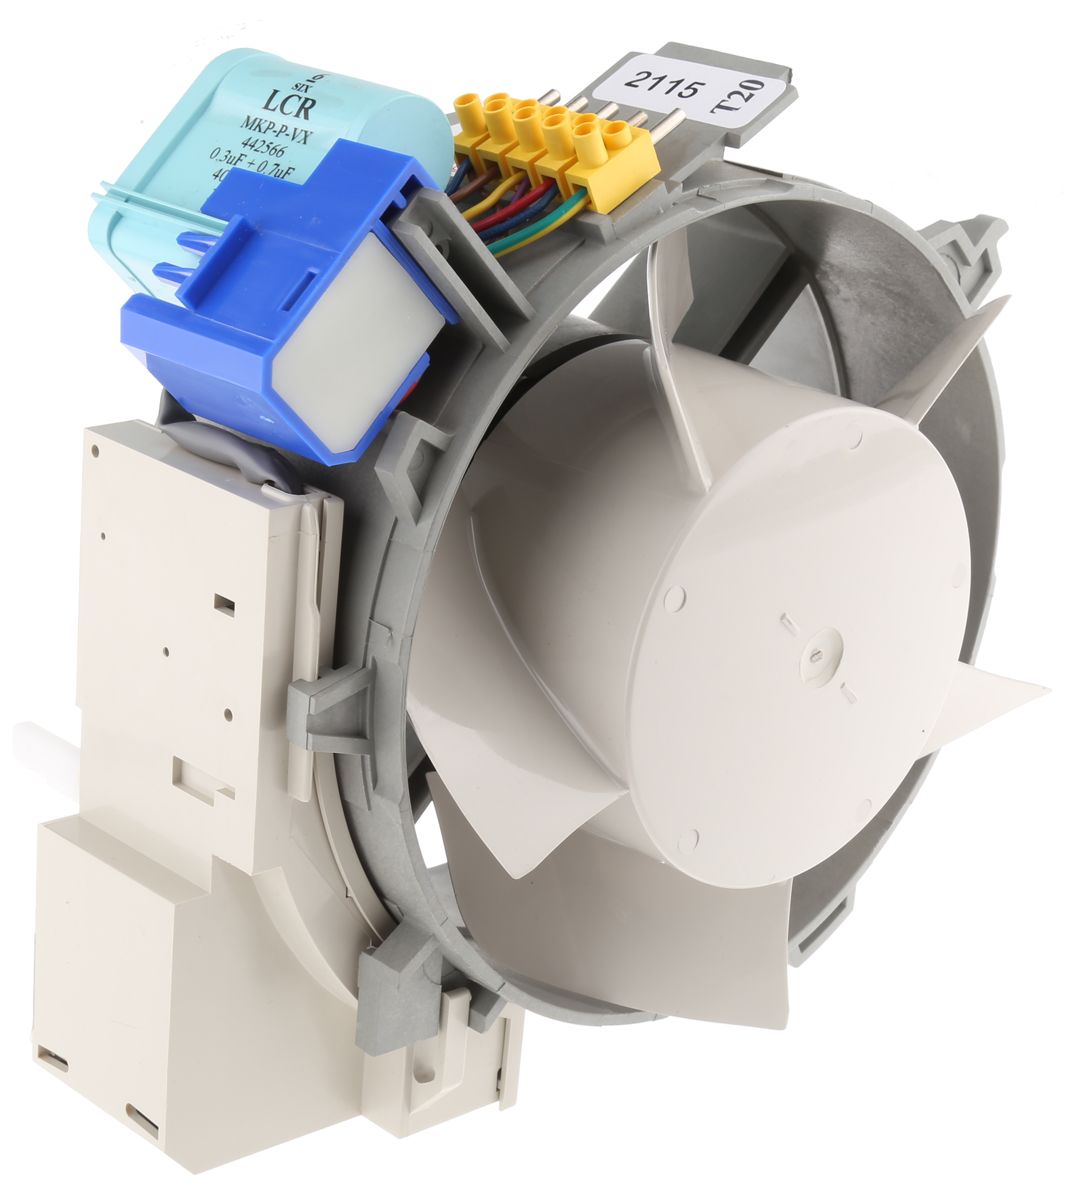 Fan Motor Assembly for use with Vent-Axia TX Series Products